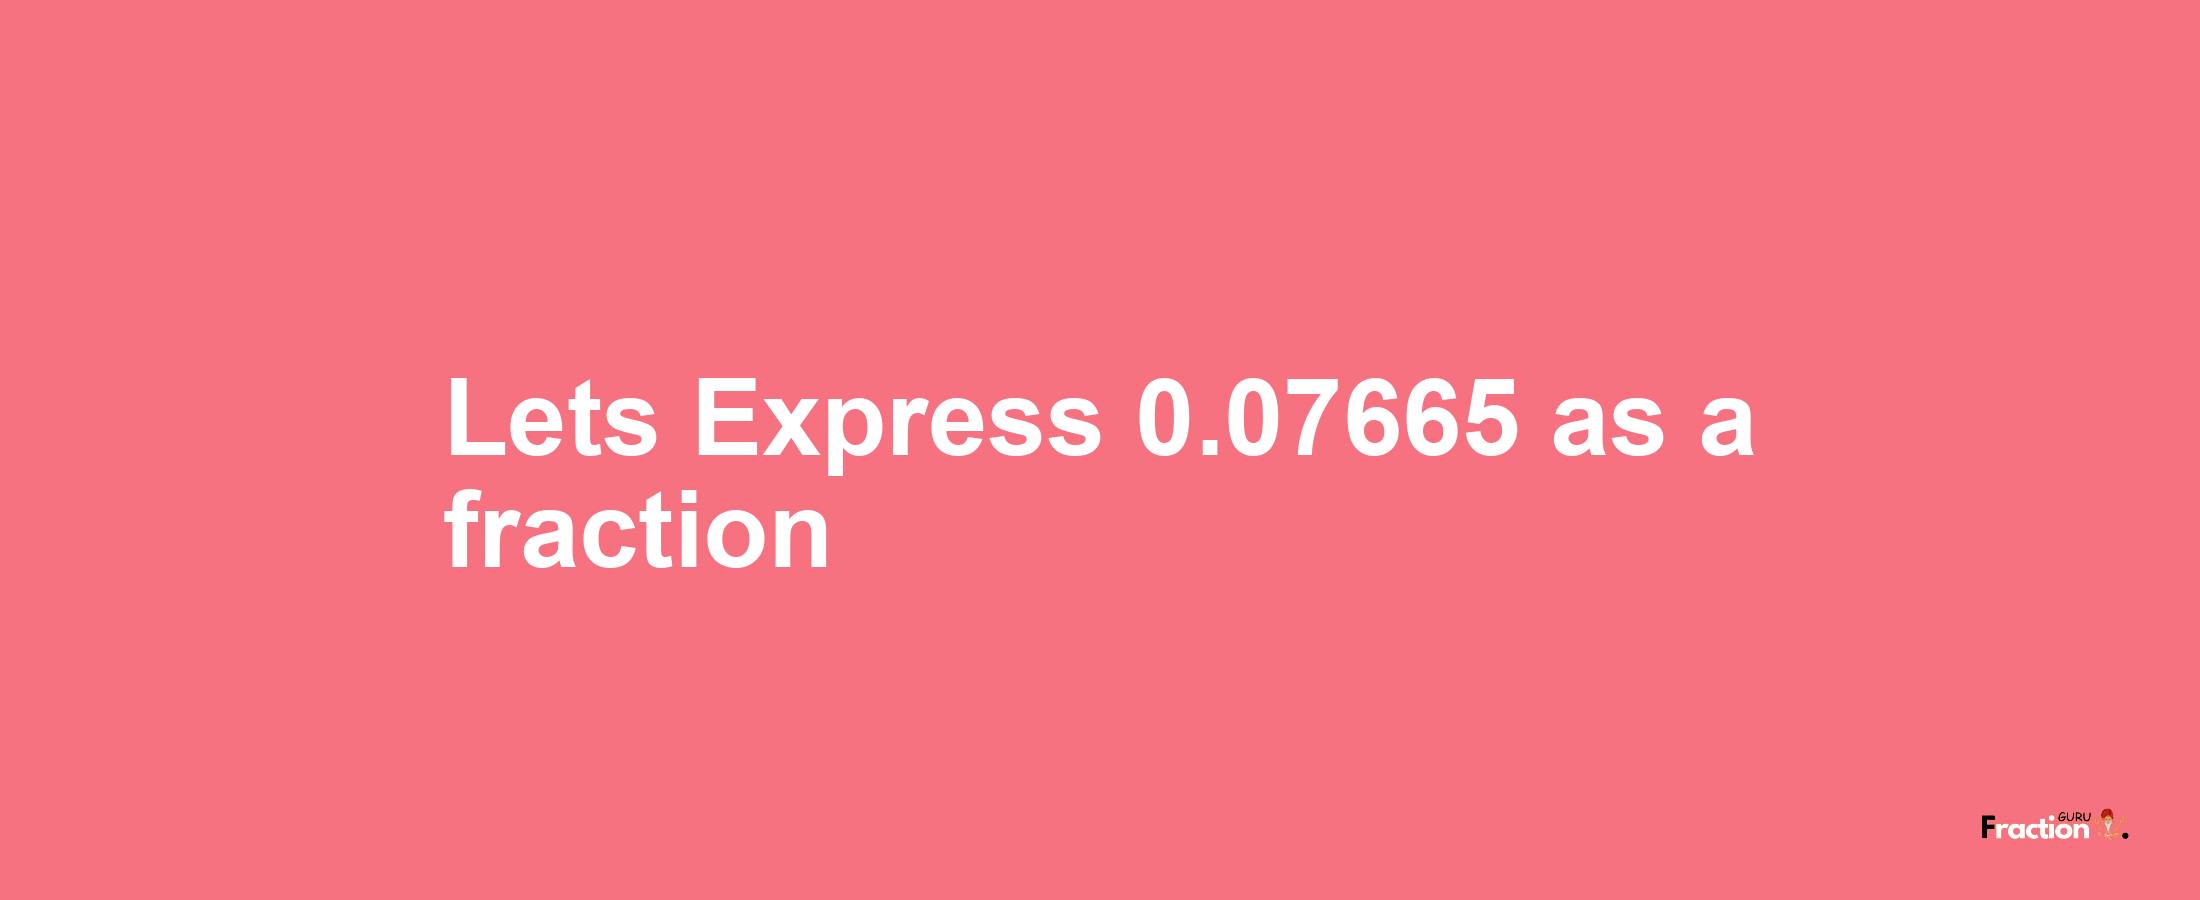 Lets Express 0.07665 as afraction